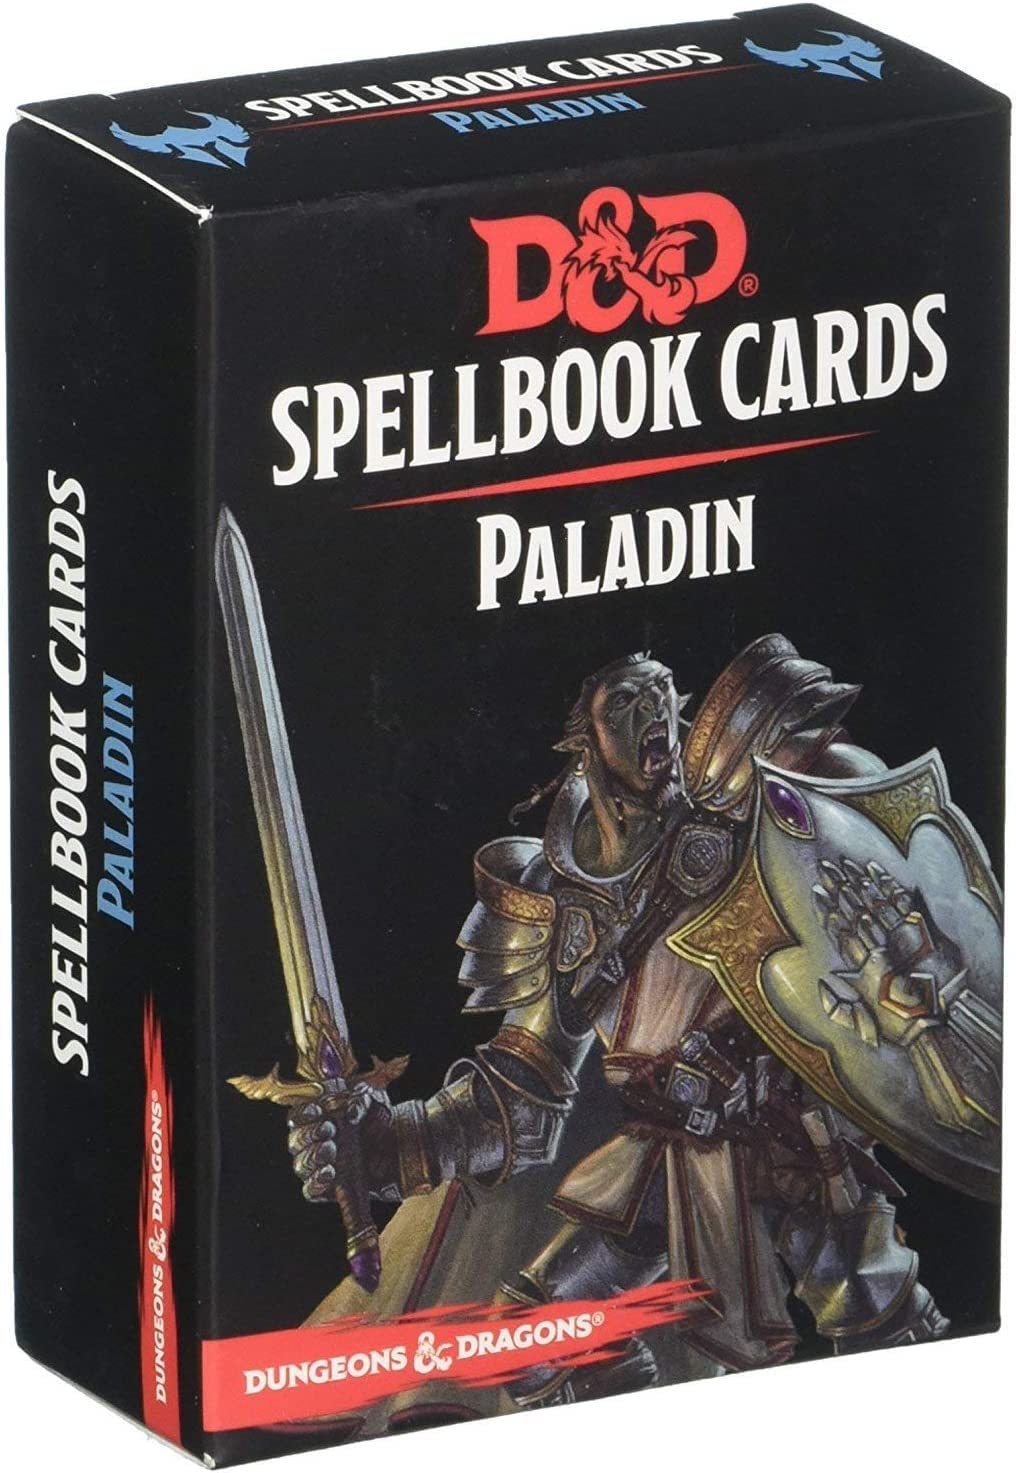 $5.12: Dungeons & Dragons Spellbook Cards: Paladin (D&D Accessory)